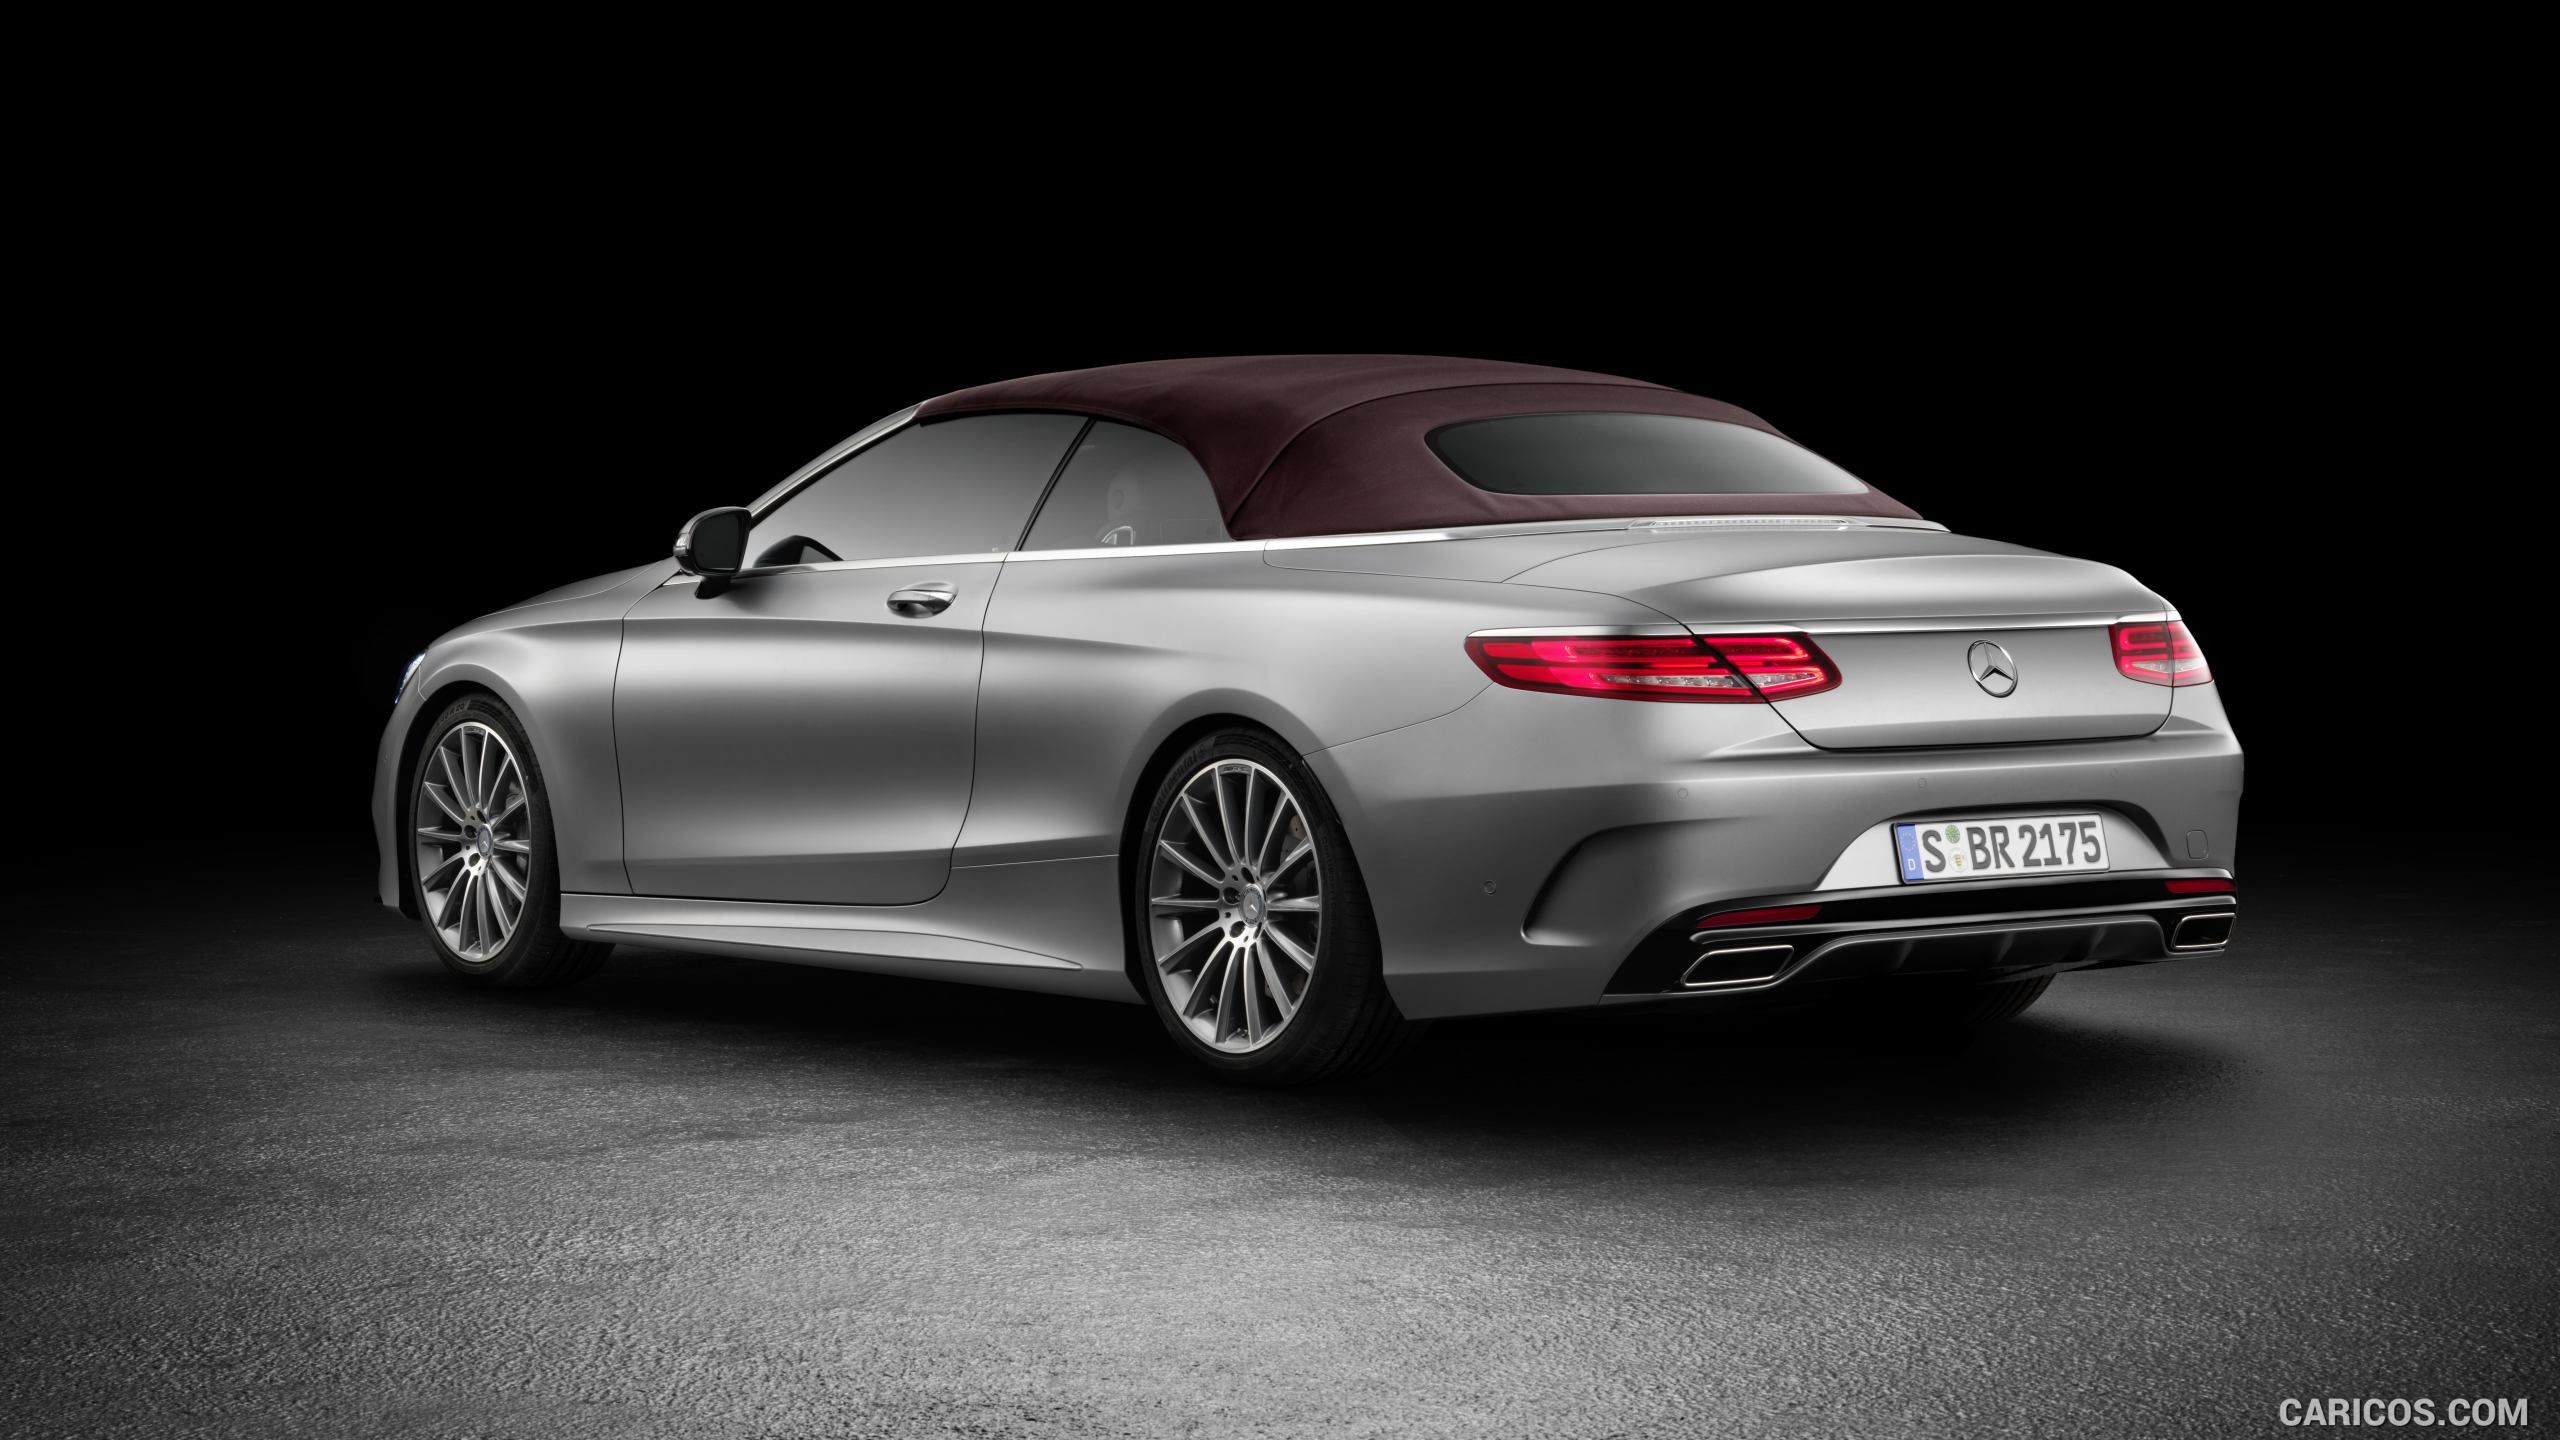 2017 Mercedes-Benz S-Class S500 Cabriolet AMG-line (Alanit Grey Magno) - Rear, #25 of 56